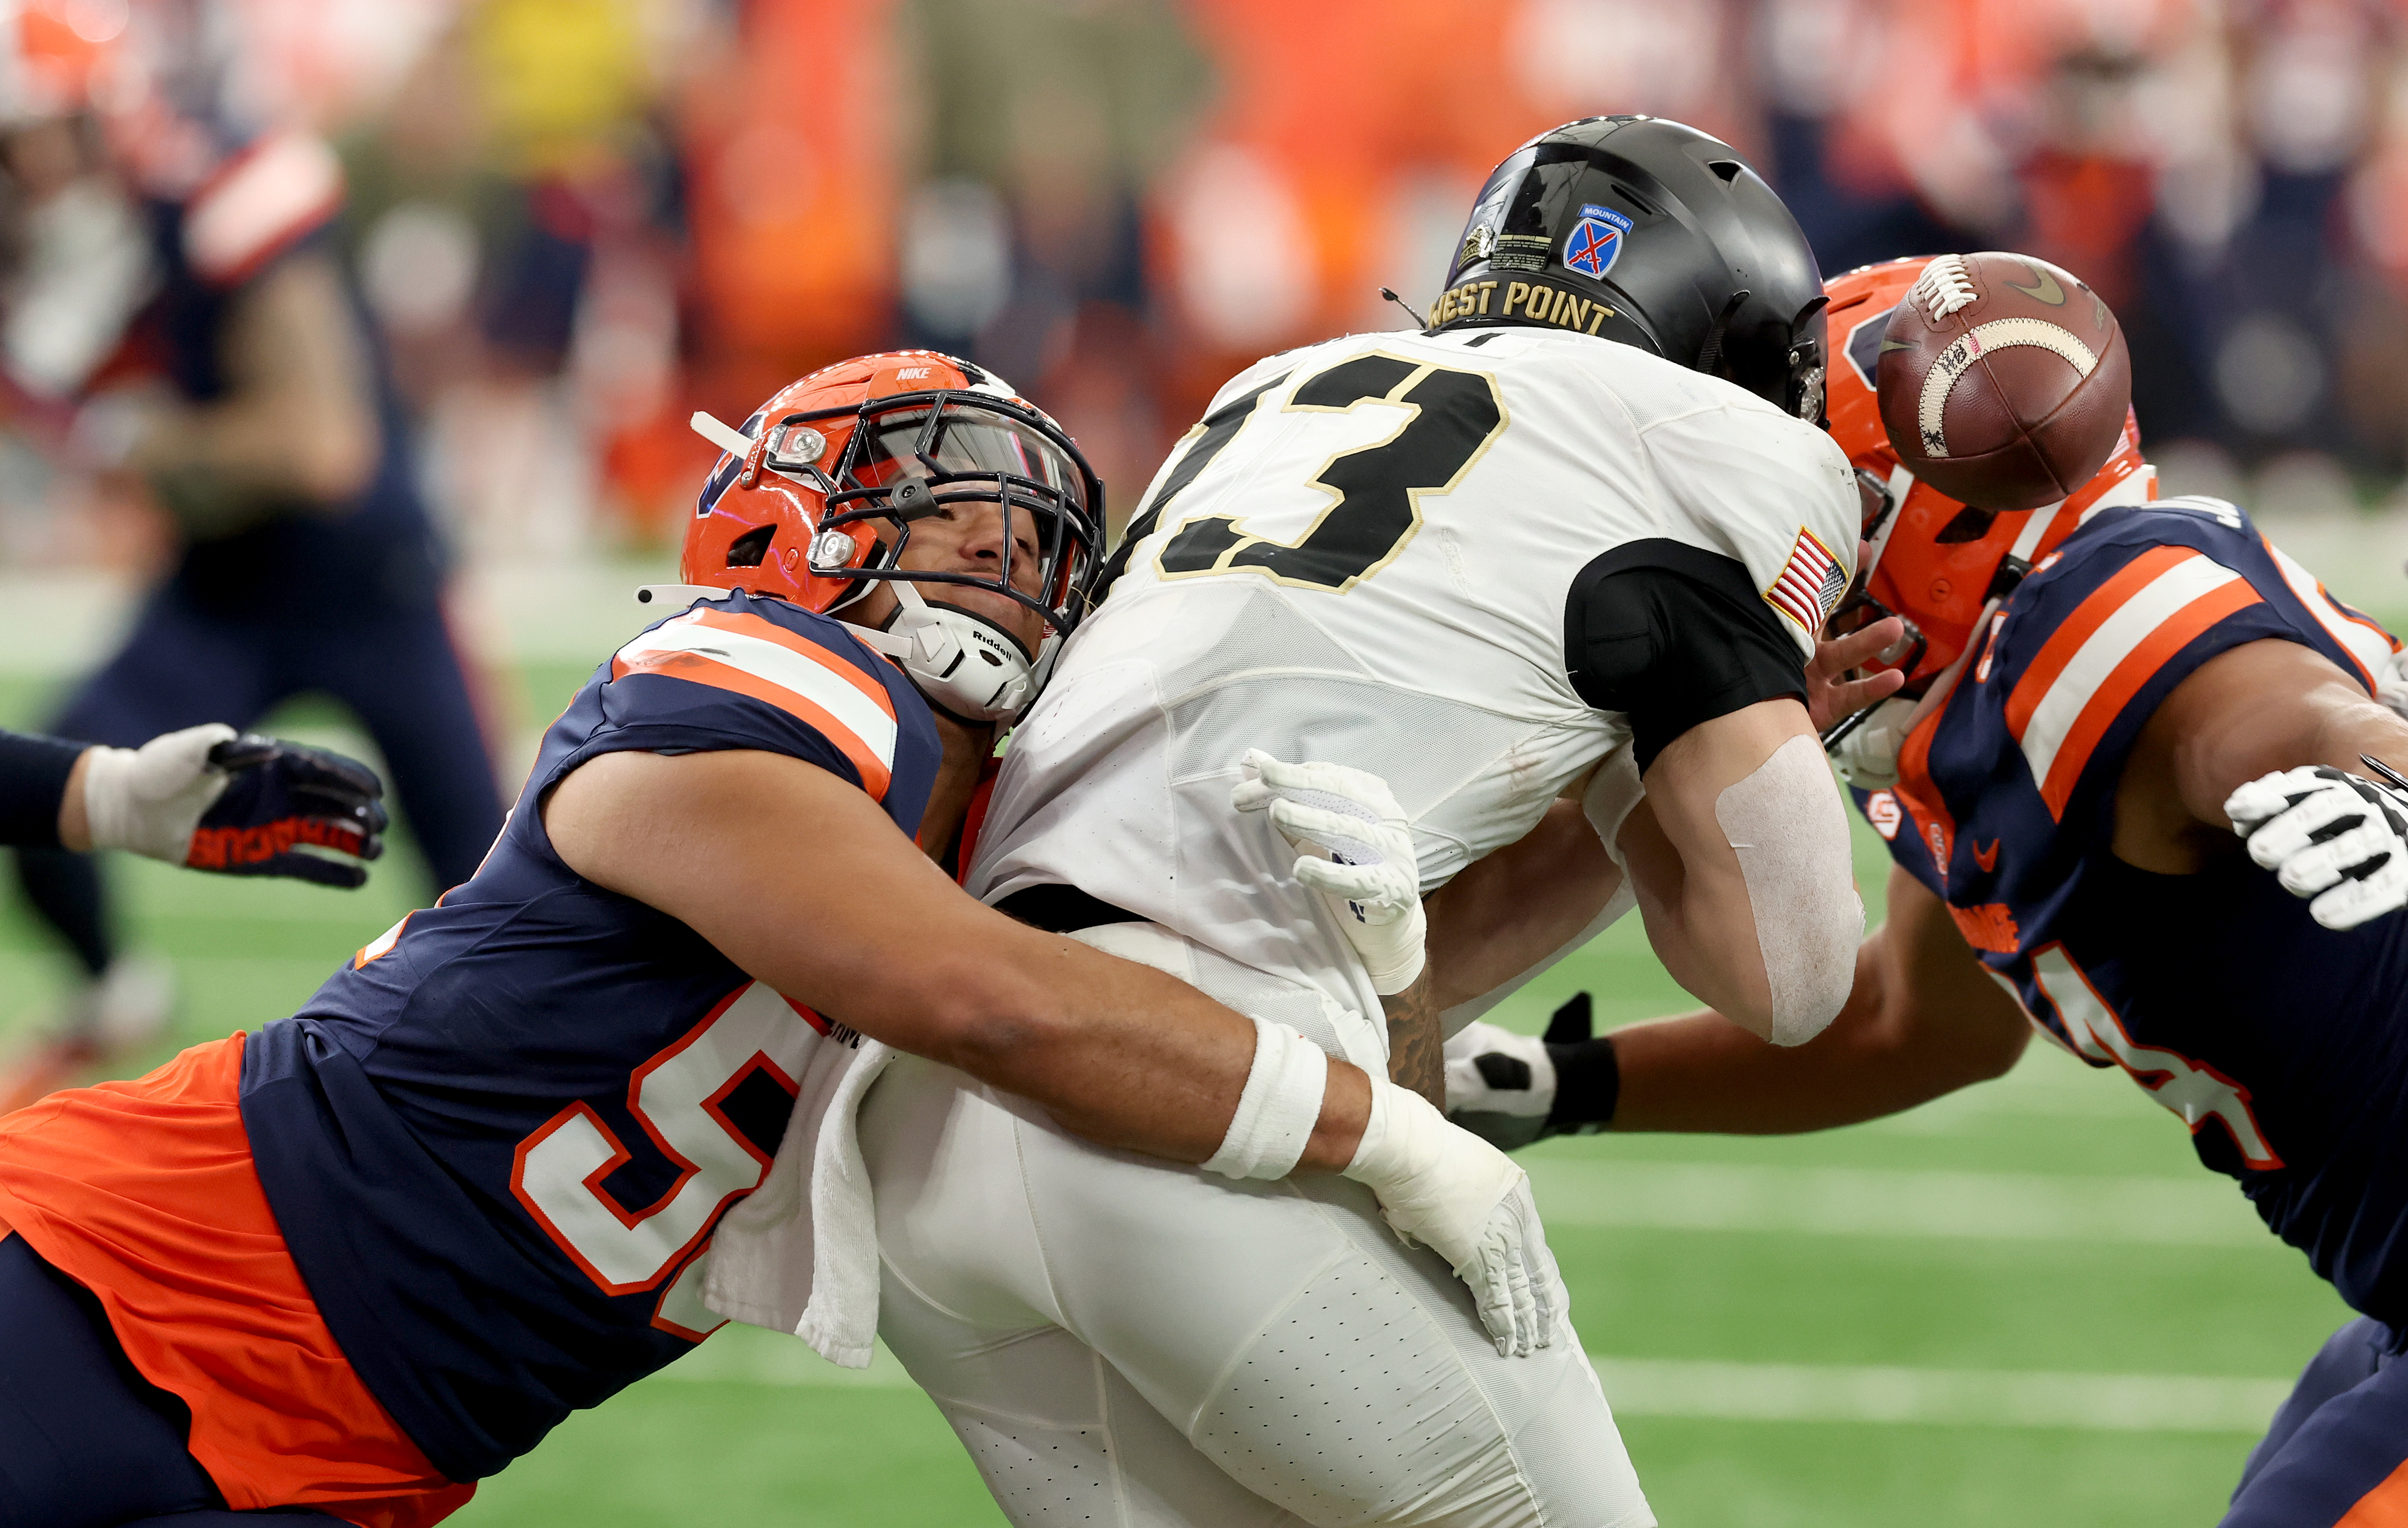 Andre Miller Injury: What We Know About the Army Defensive Lineman